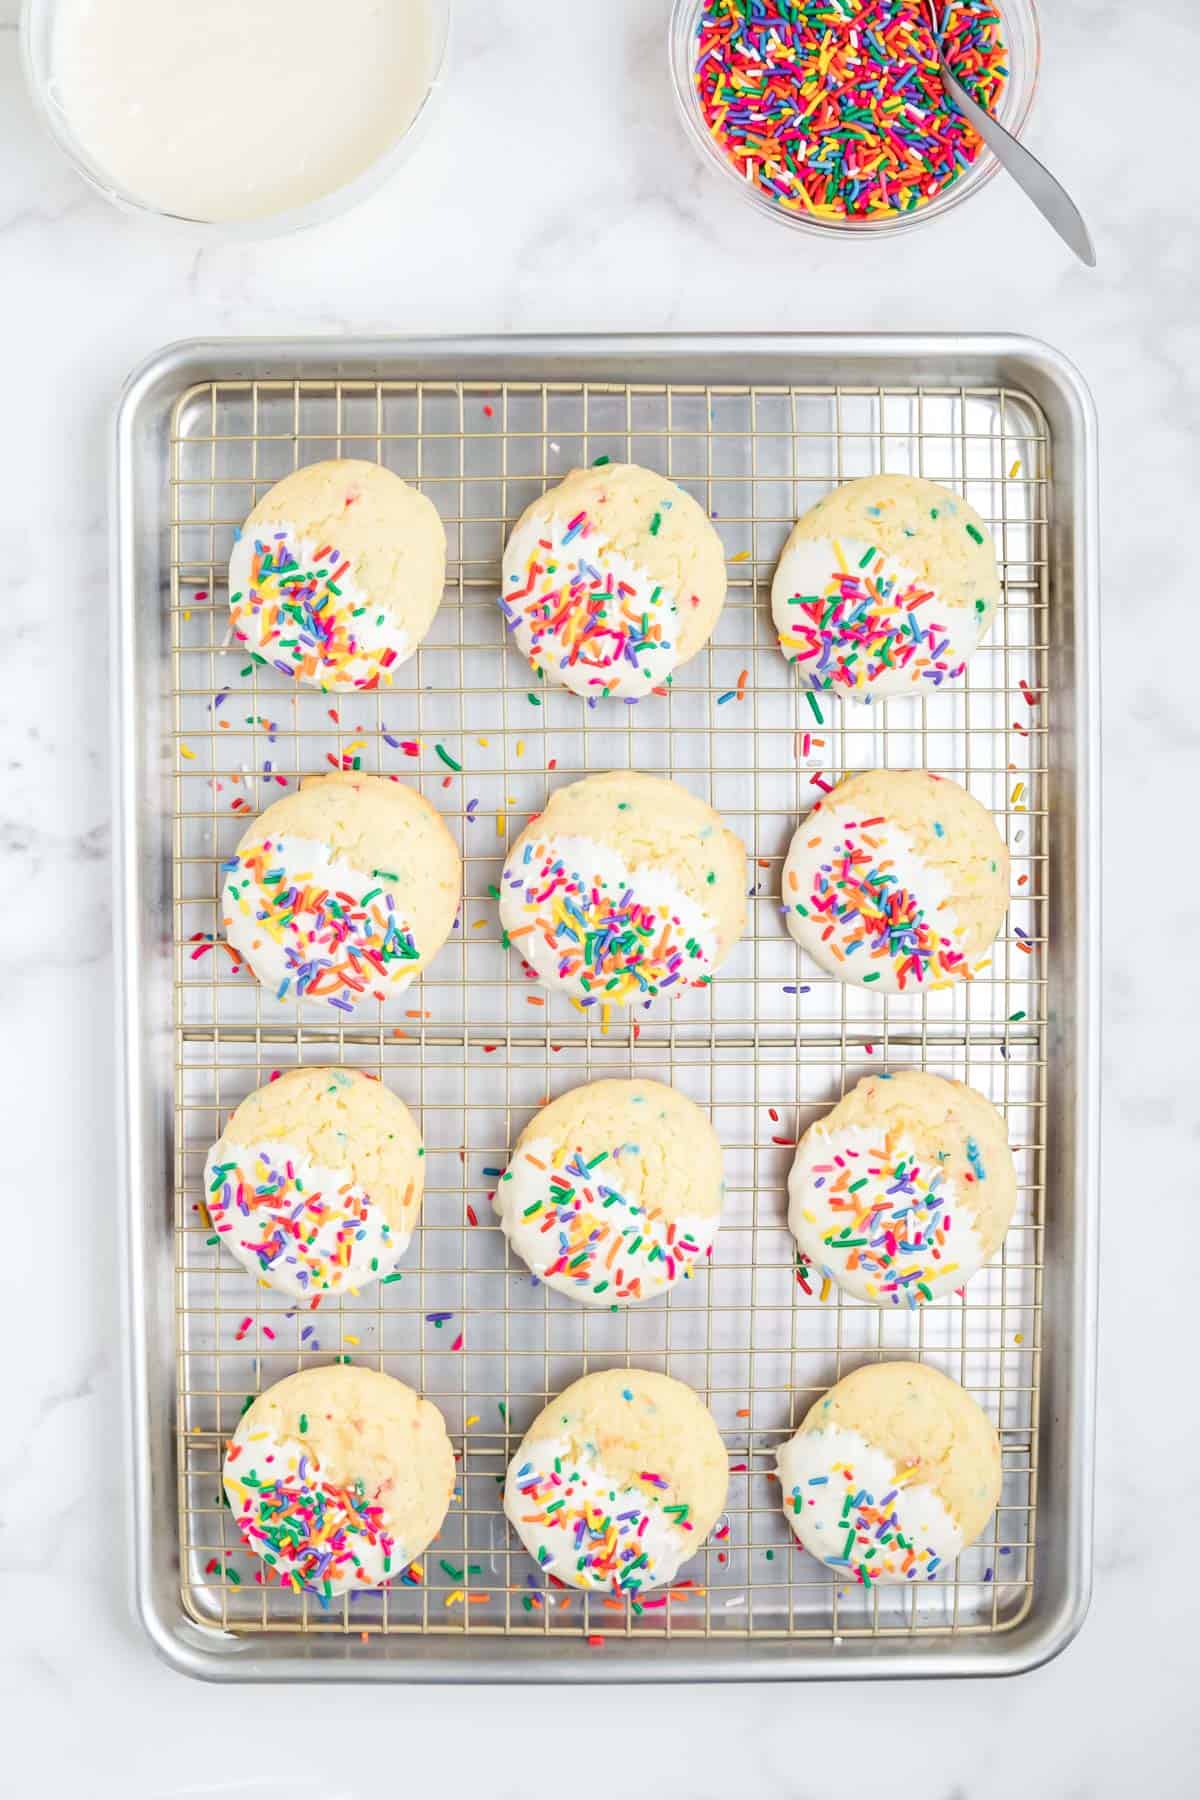 Funfetti cake mix cookies dipped in frosting and covered in rainbow sprinkles.